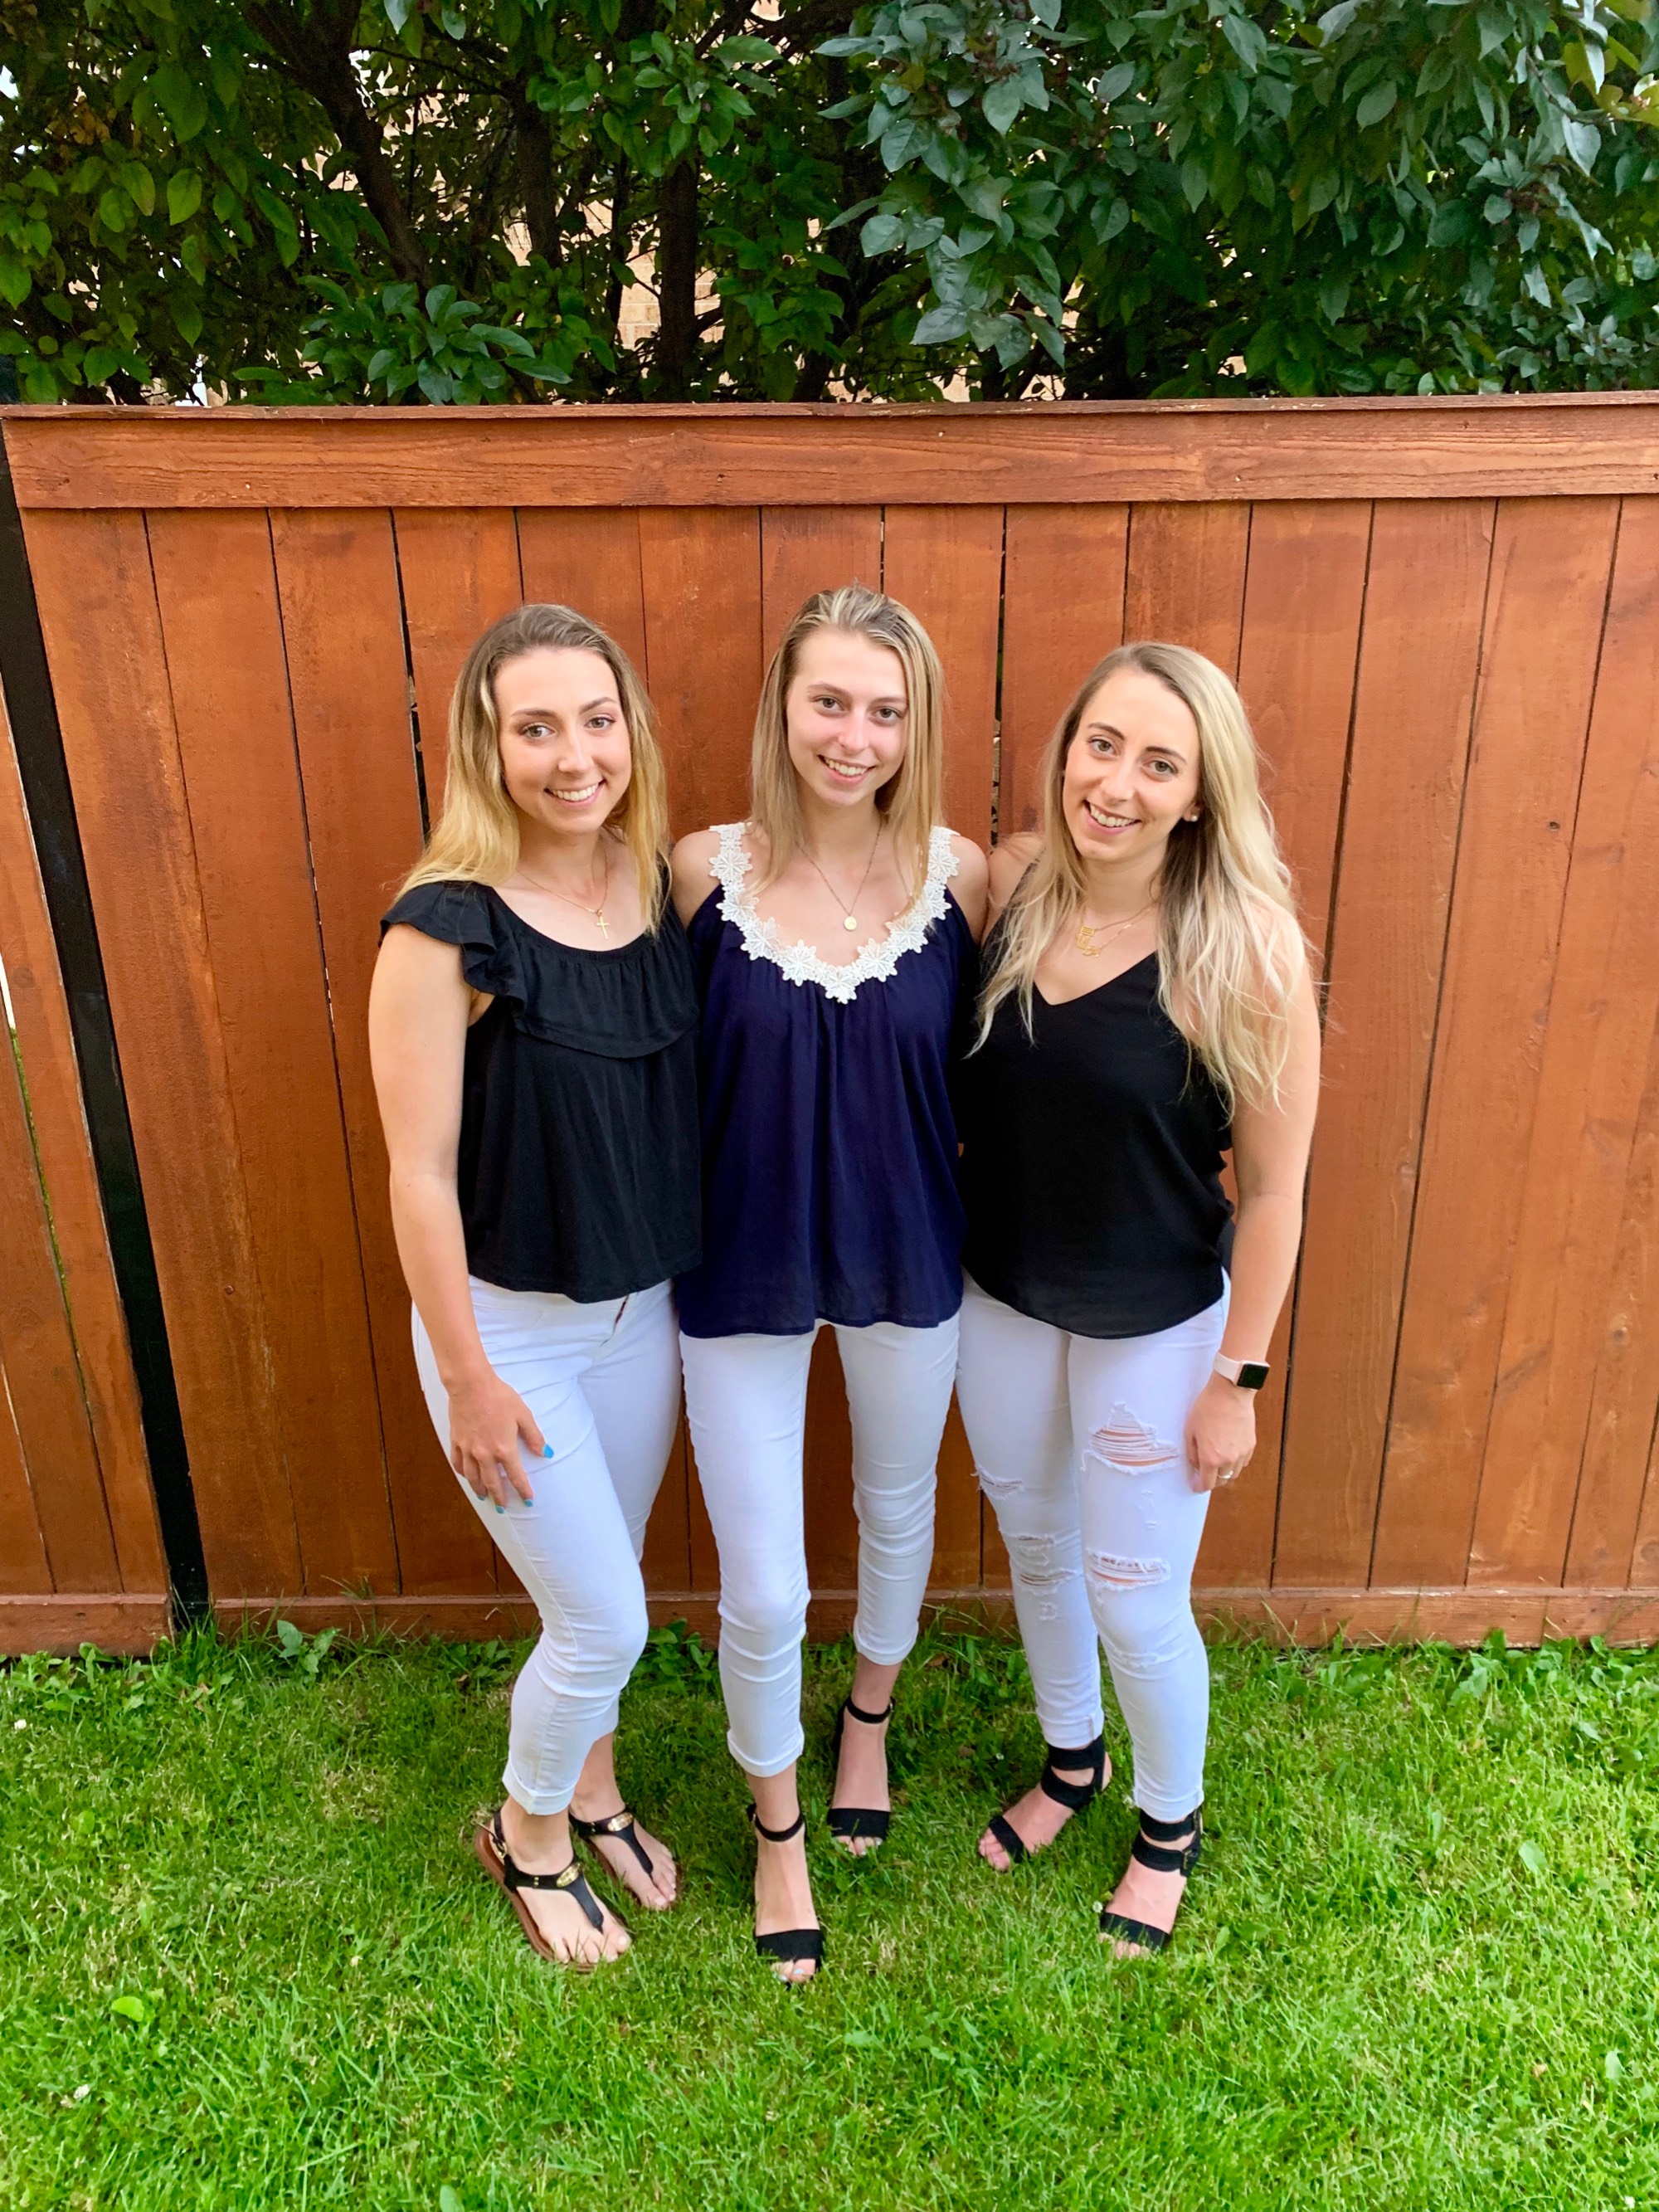 Three sisters all wearing black tops and jeans standing together in from of a wood fence